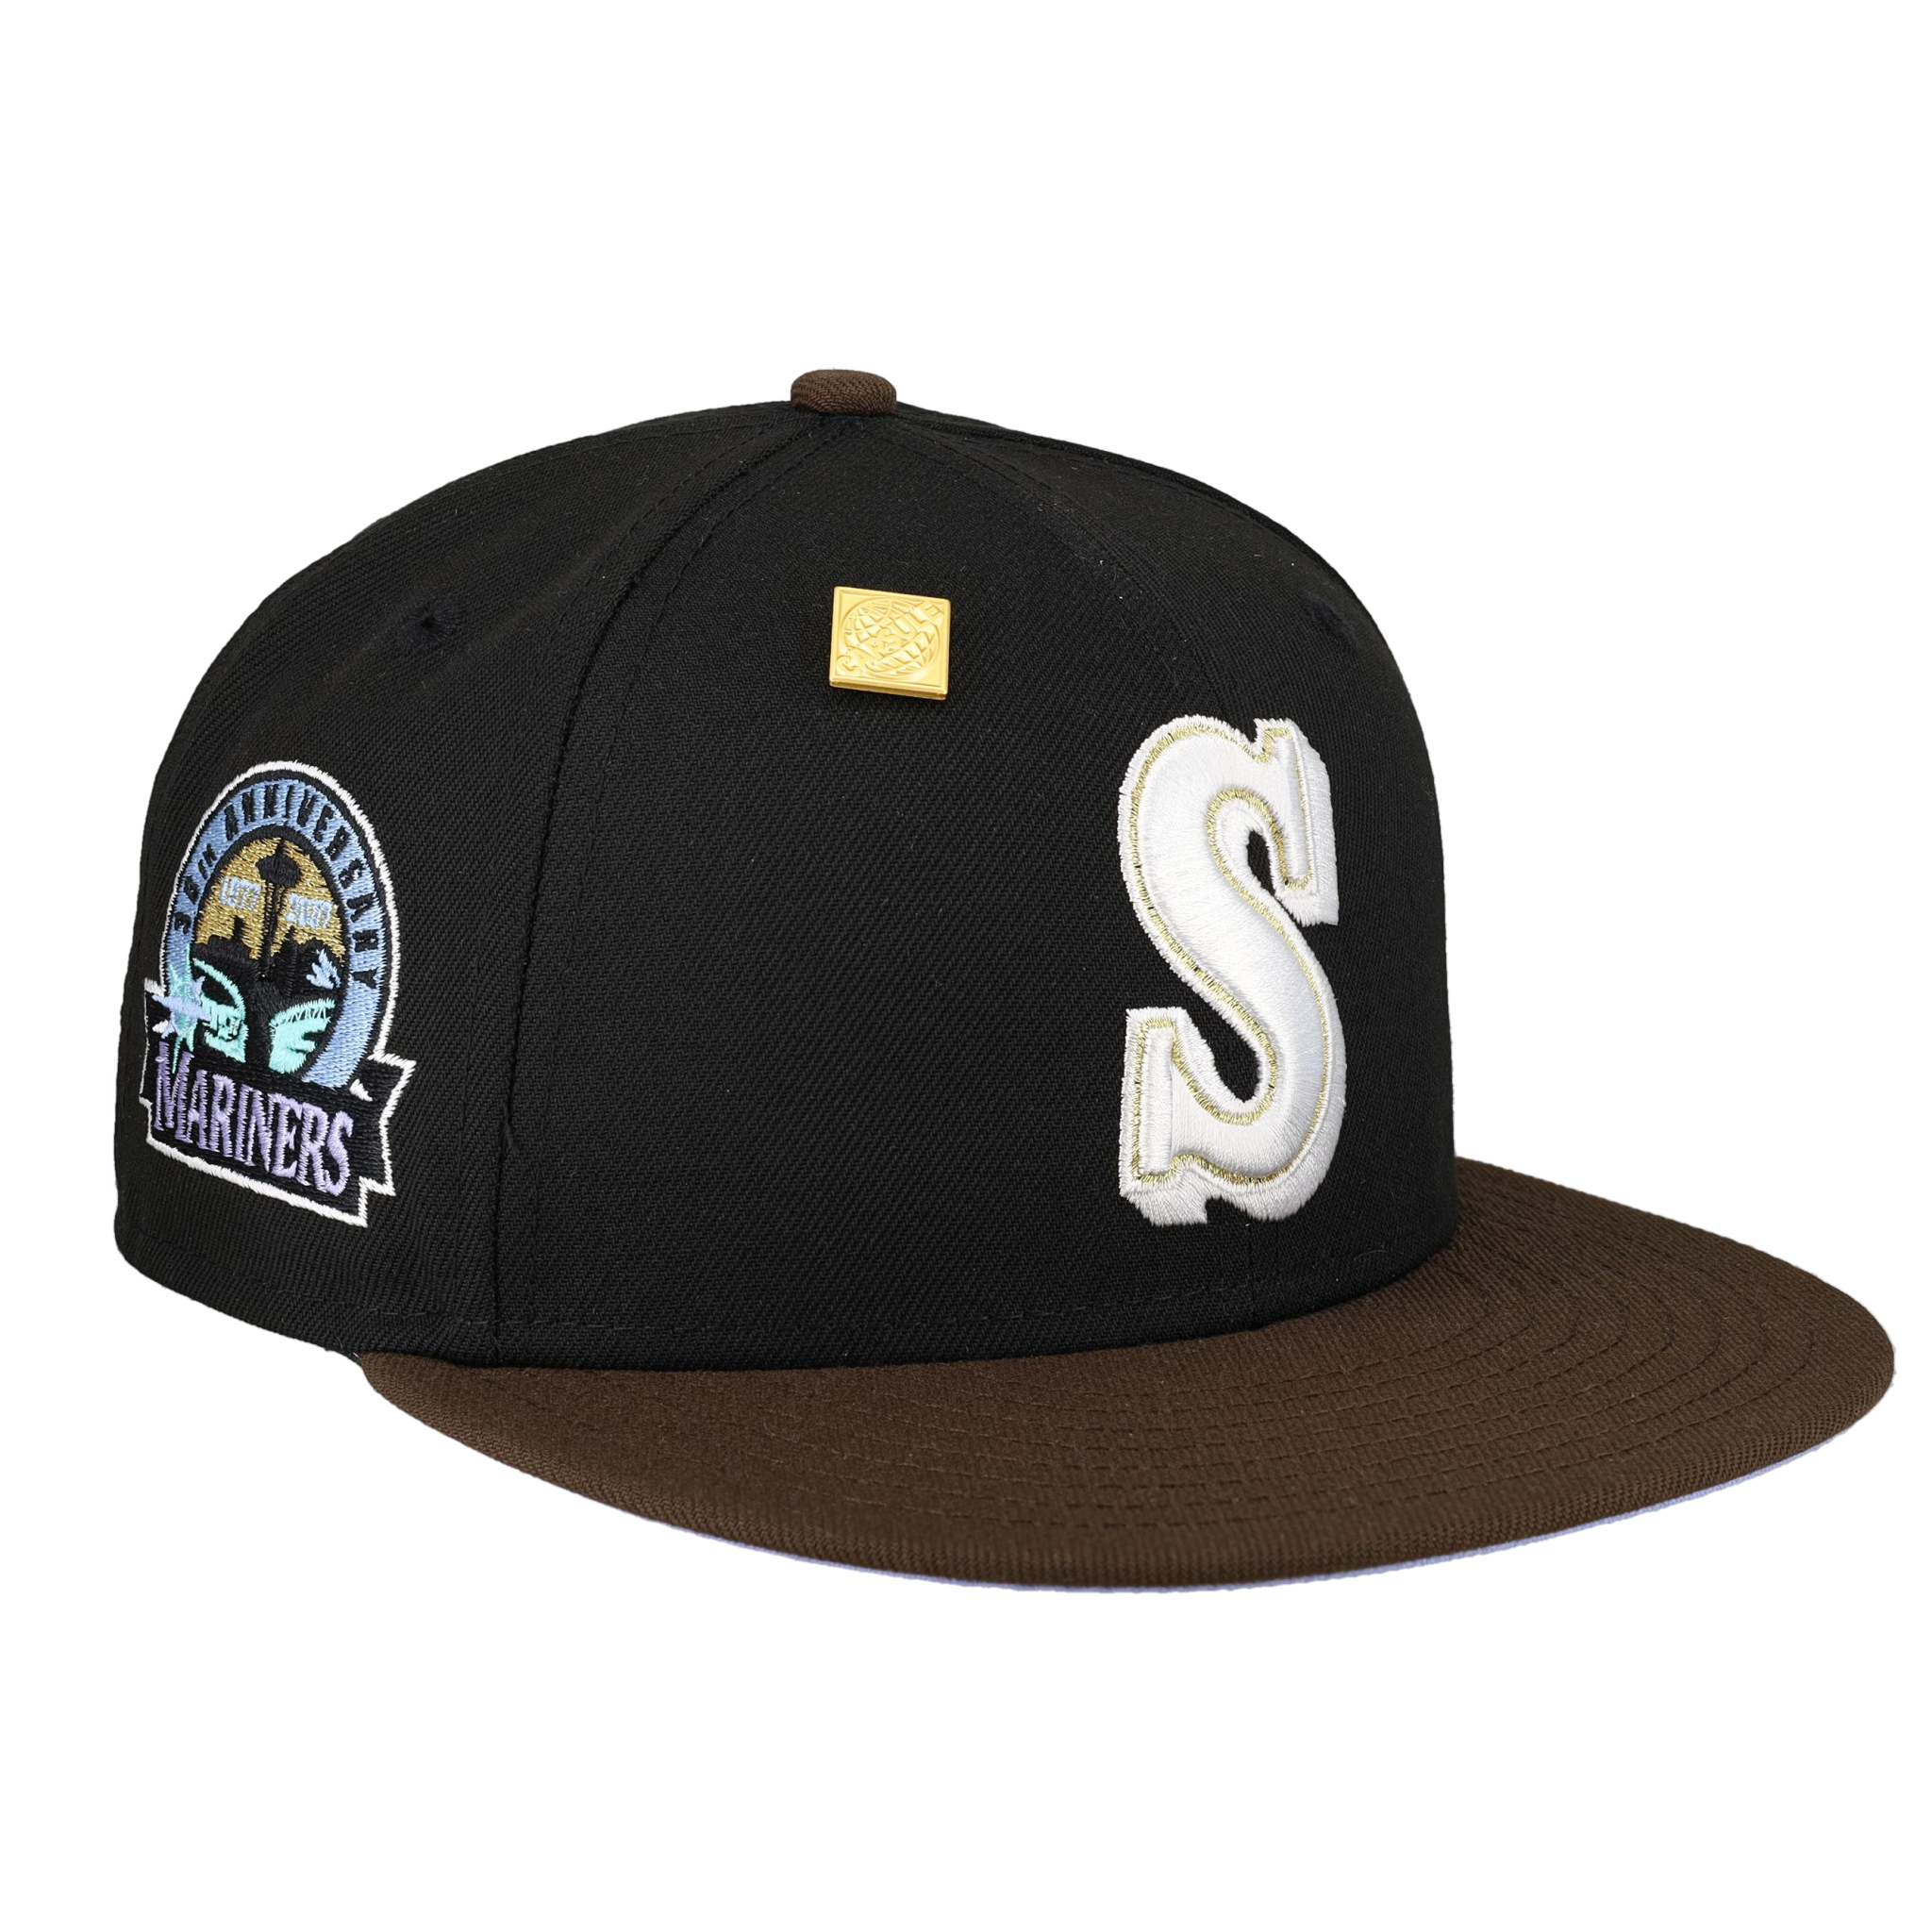 Seattle Mariners Vintage Series 30th Anniversary Fitted Hat 7 1/4